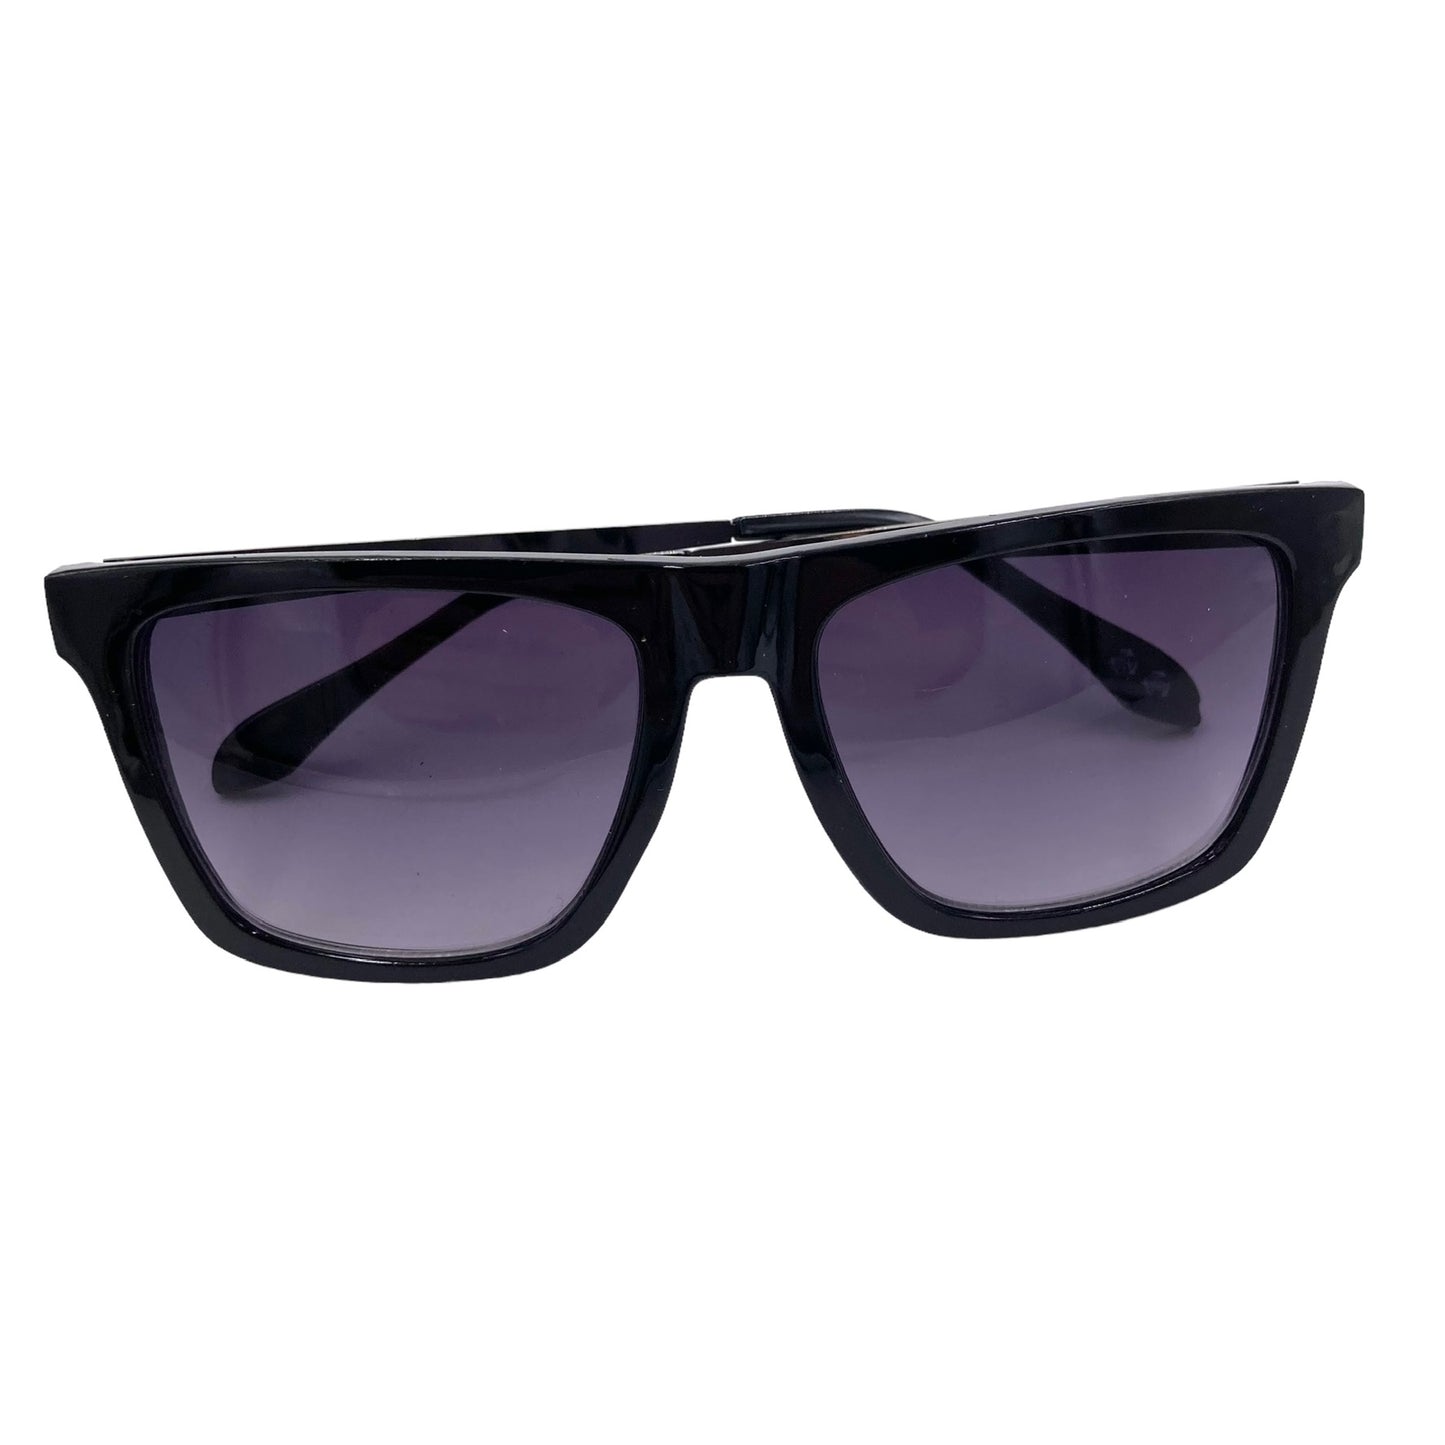 Recycled Plastic Sunglasses - Kate Style, Black